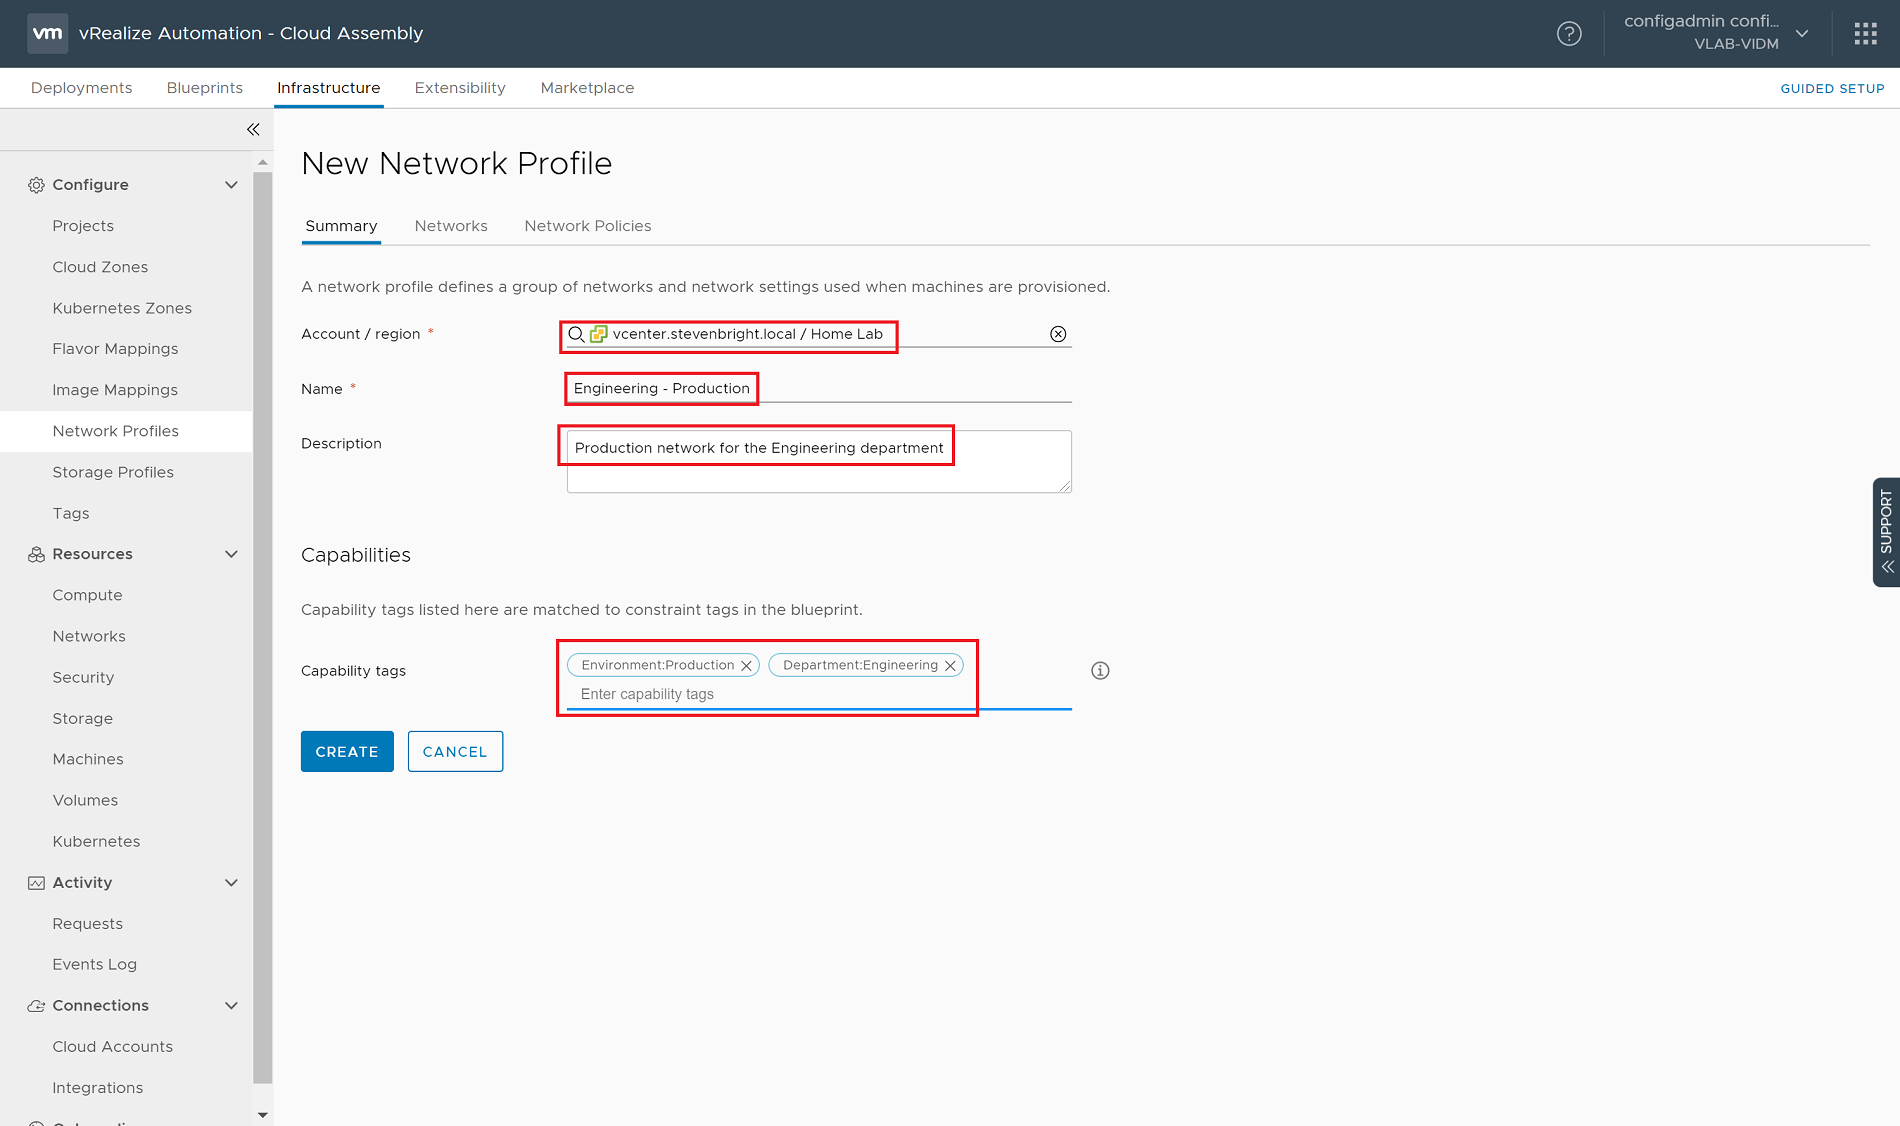 vRealize Automation 8.0 - Cloud Assembly - Infrastructure - Network Profiles - New Network Profile - Summary Tab